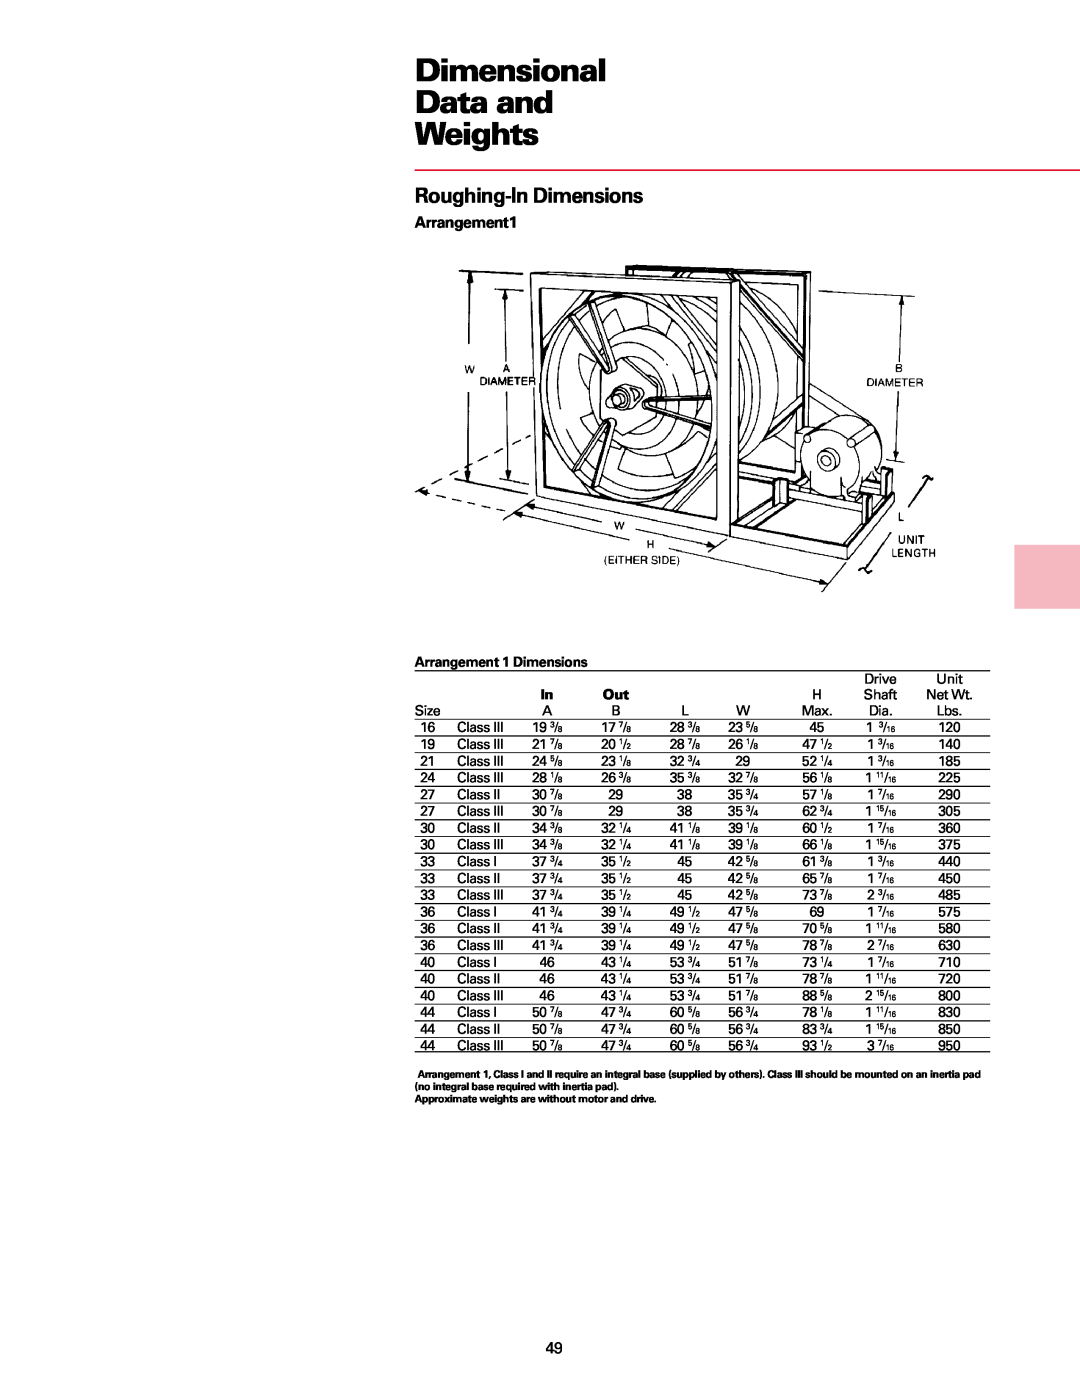 Trane Fan manual Arrangement1, Dimensional Data and Weights, Roughing-InDimensions, Arrangement 1 Dimensions 